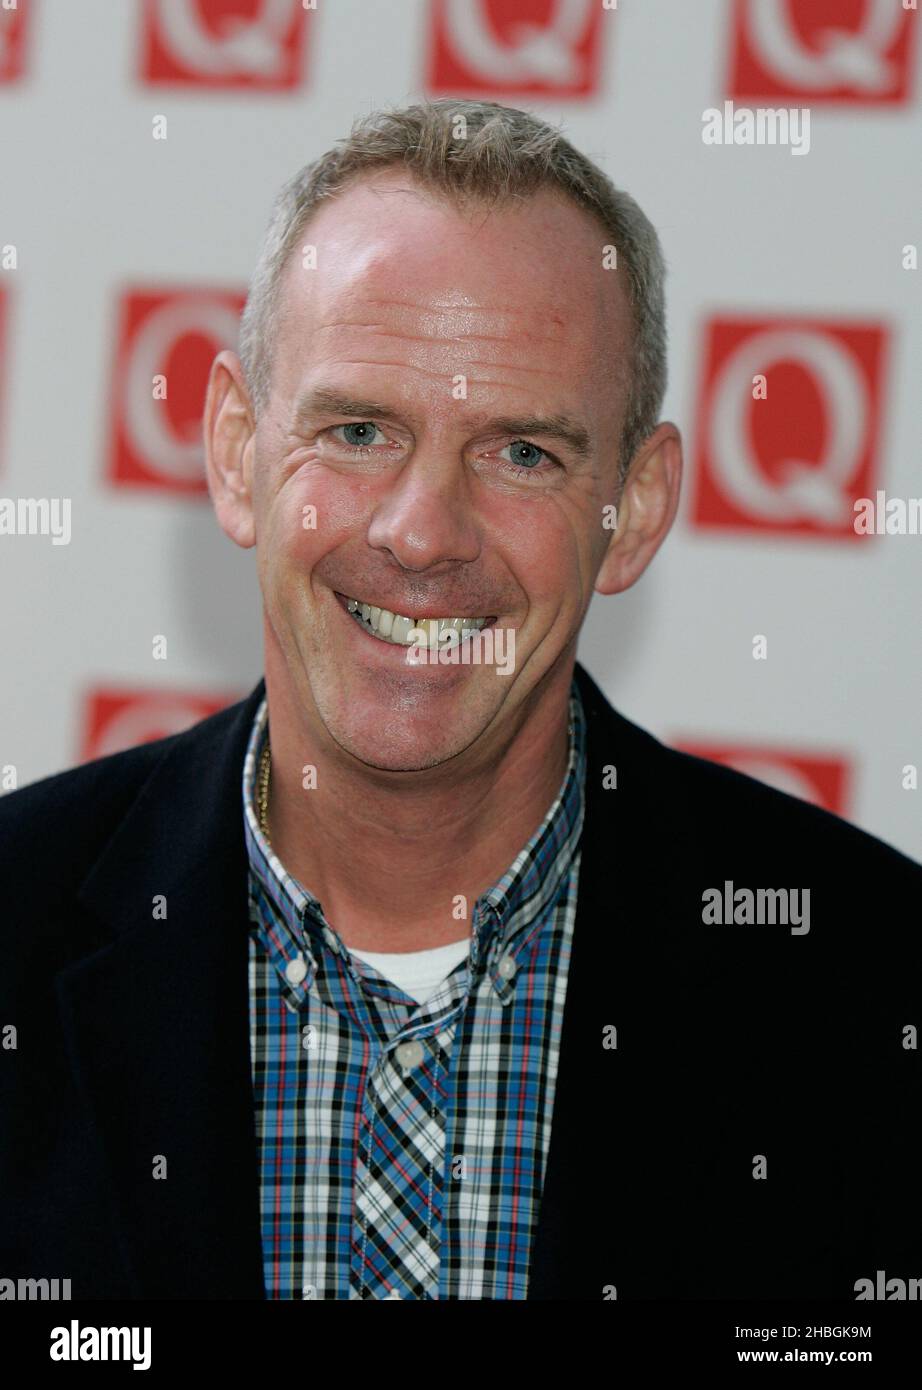 Norman Cook aka Fatboy Slim arriving at the Q Awards held at the Grosvenor House Hotel, London. Stock Photo